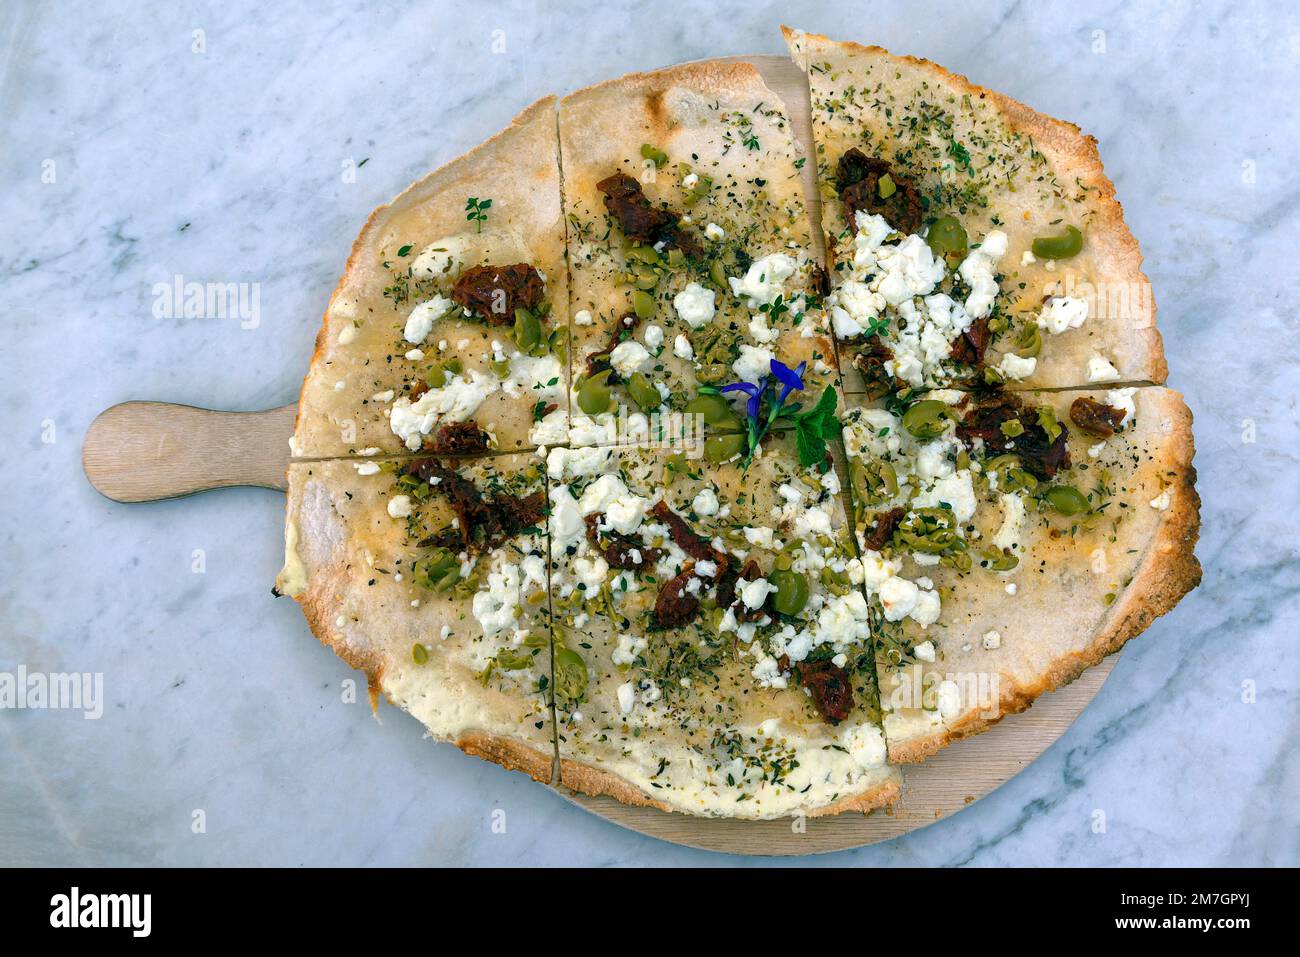 Flammkuchen with olives dried tomatoes and feta cheese on a wooden board, Bavaria, Germany Stock Photo